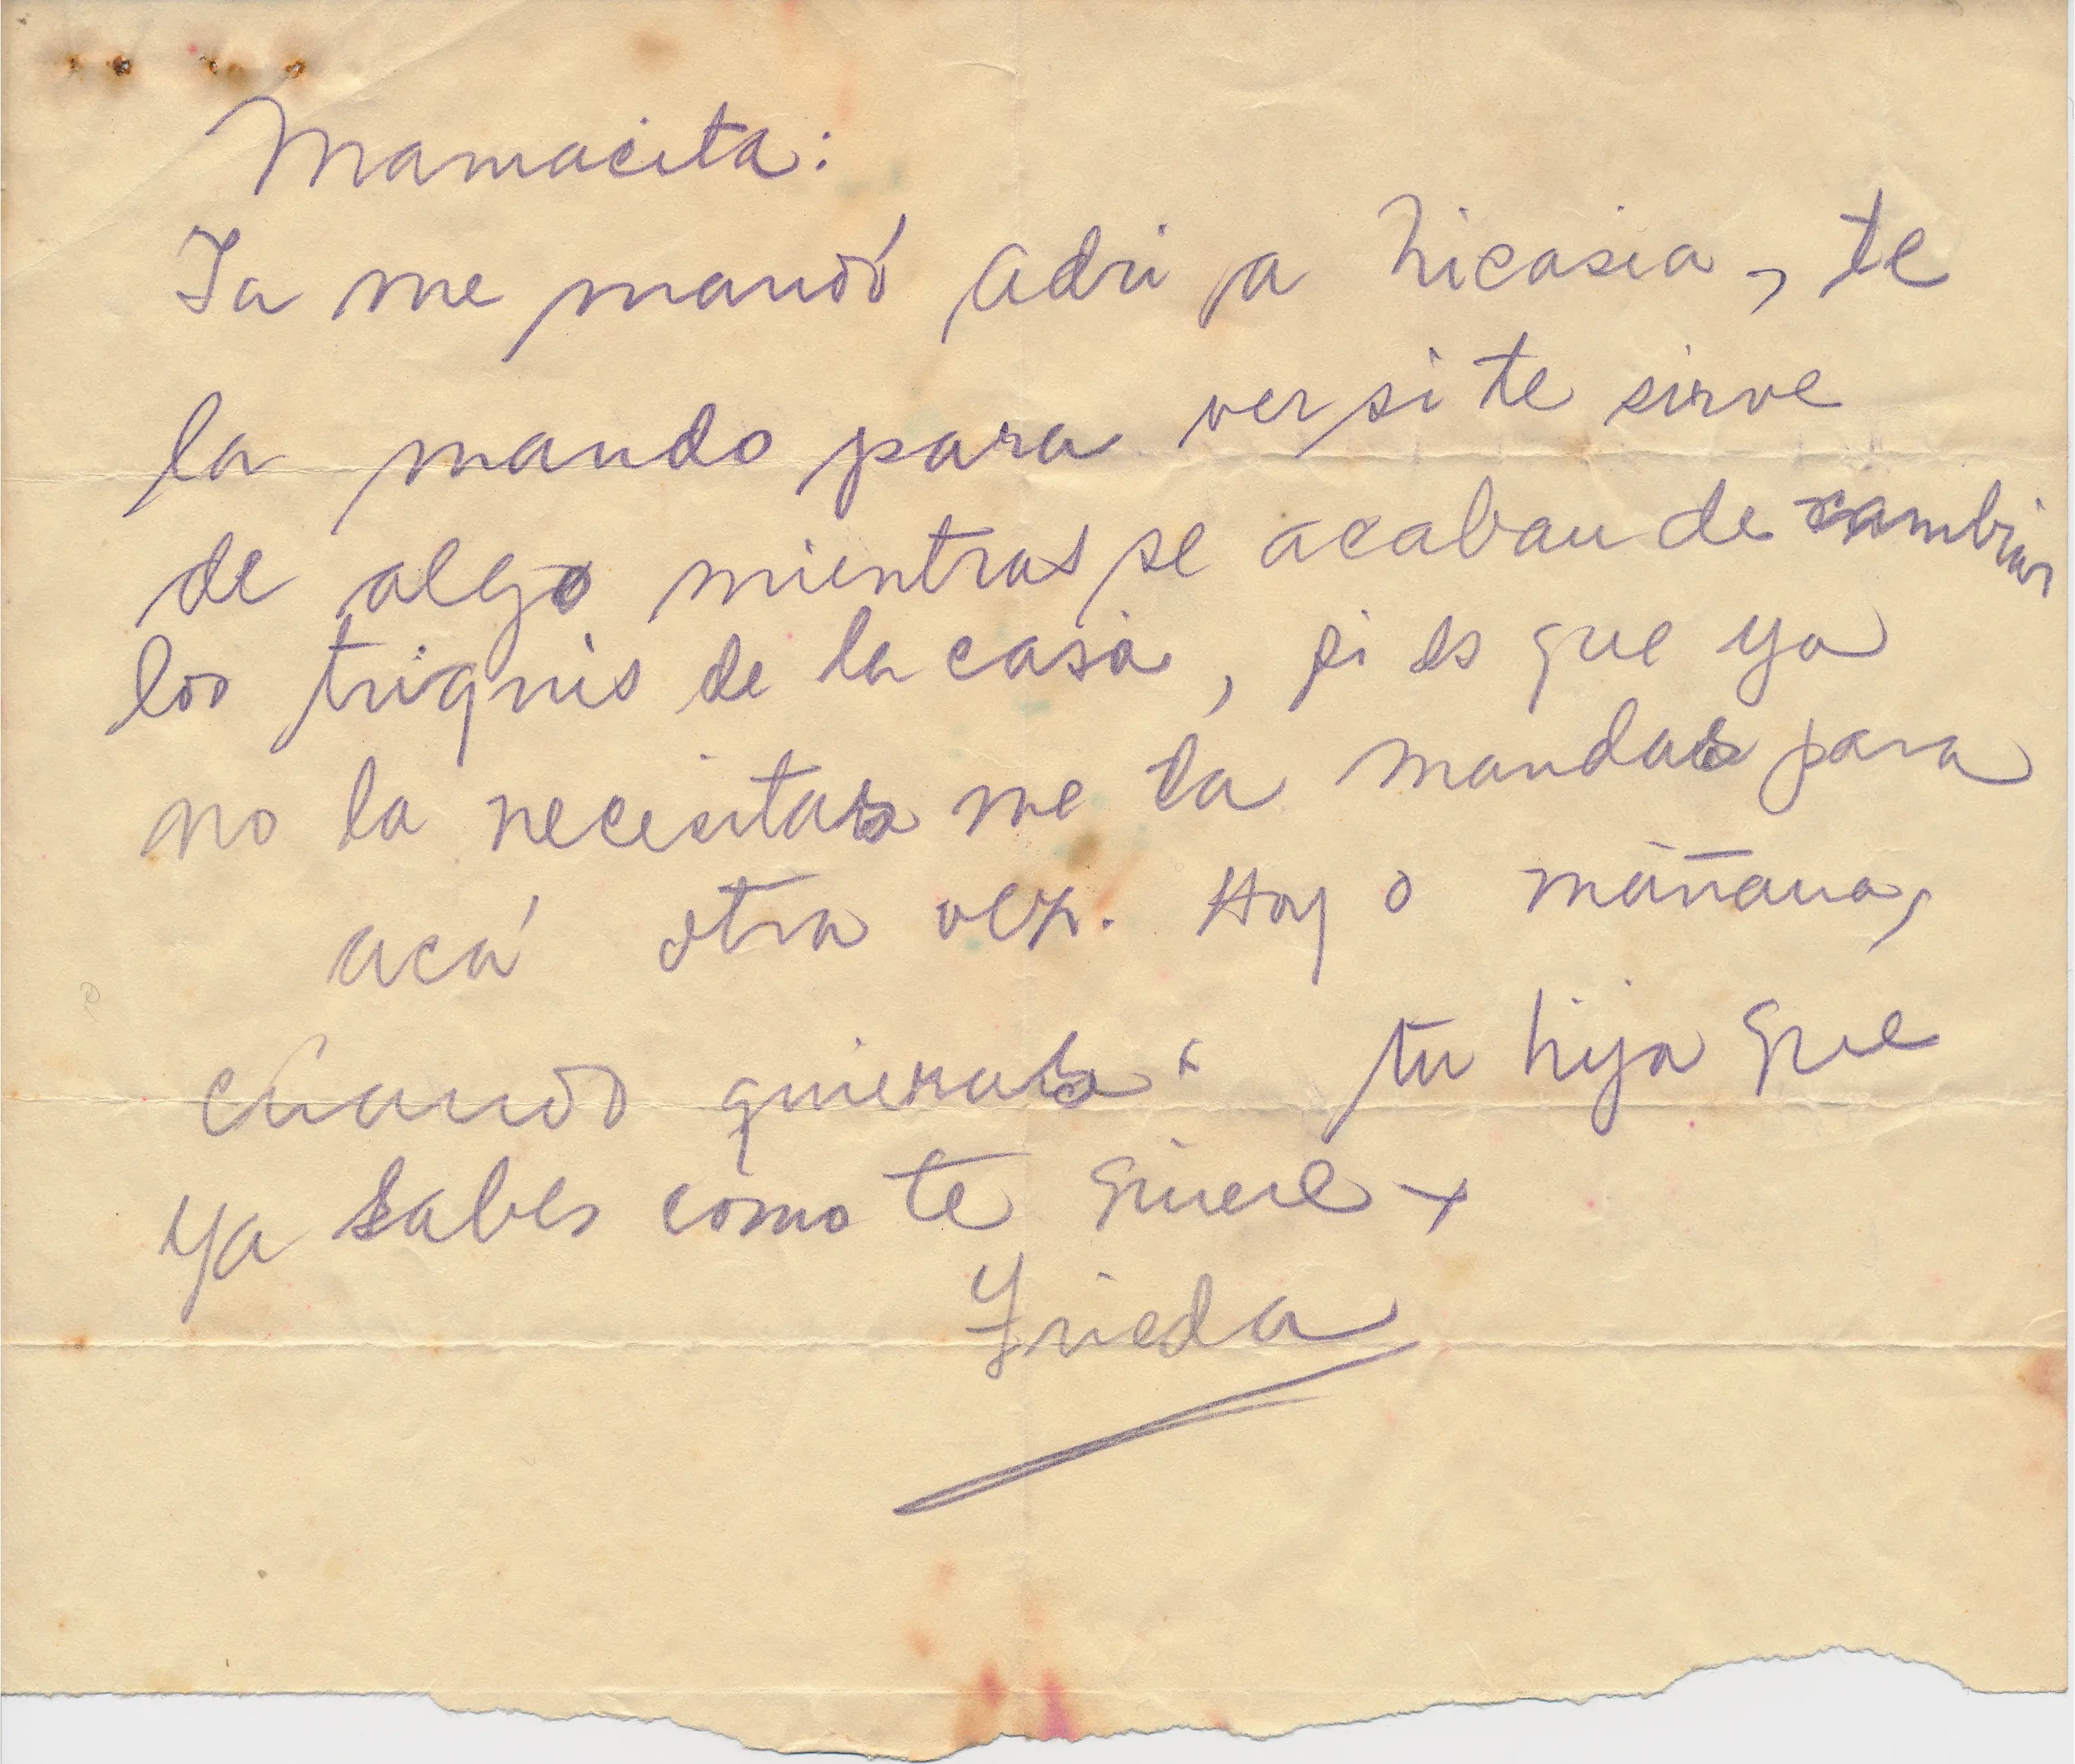 A handwritten letter by Frida Kahlo in Spanish on a piece of tan colored paper that is torn in half.